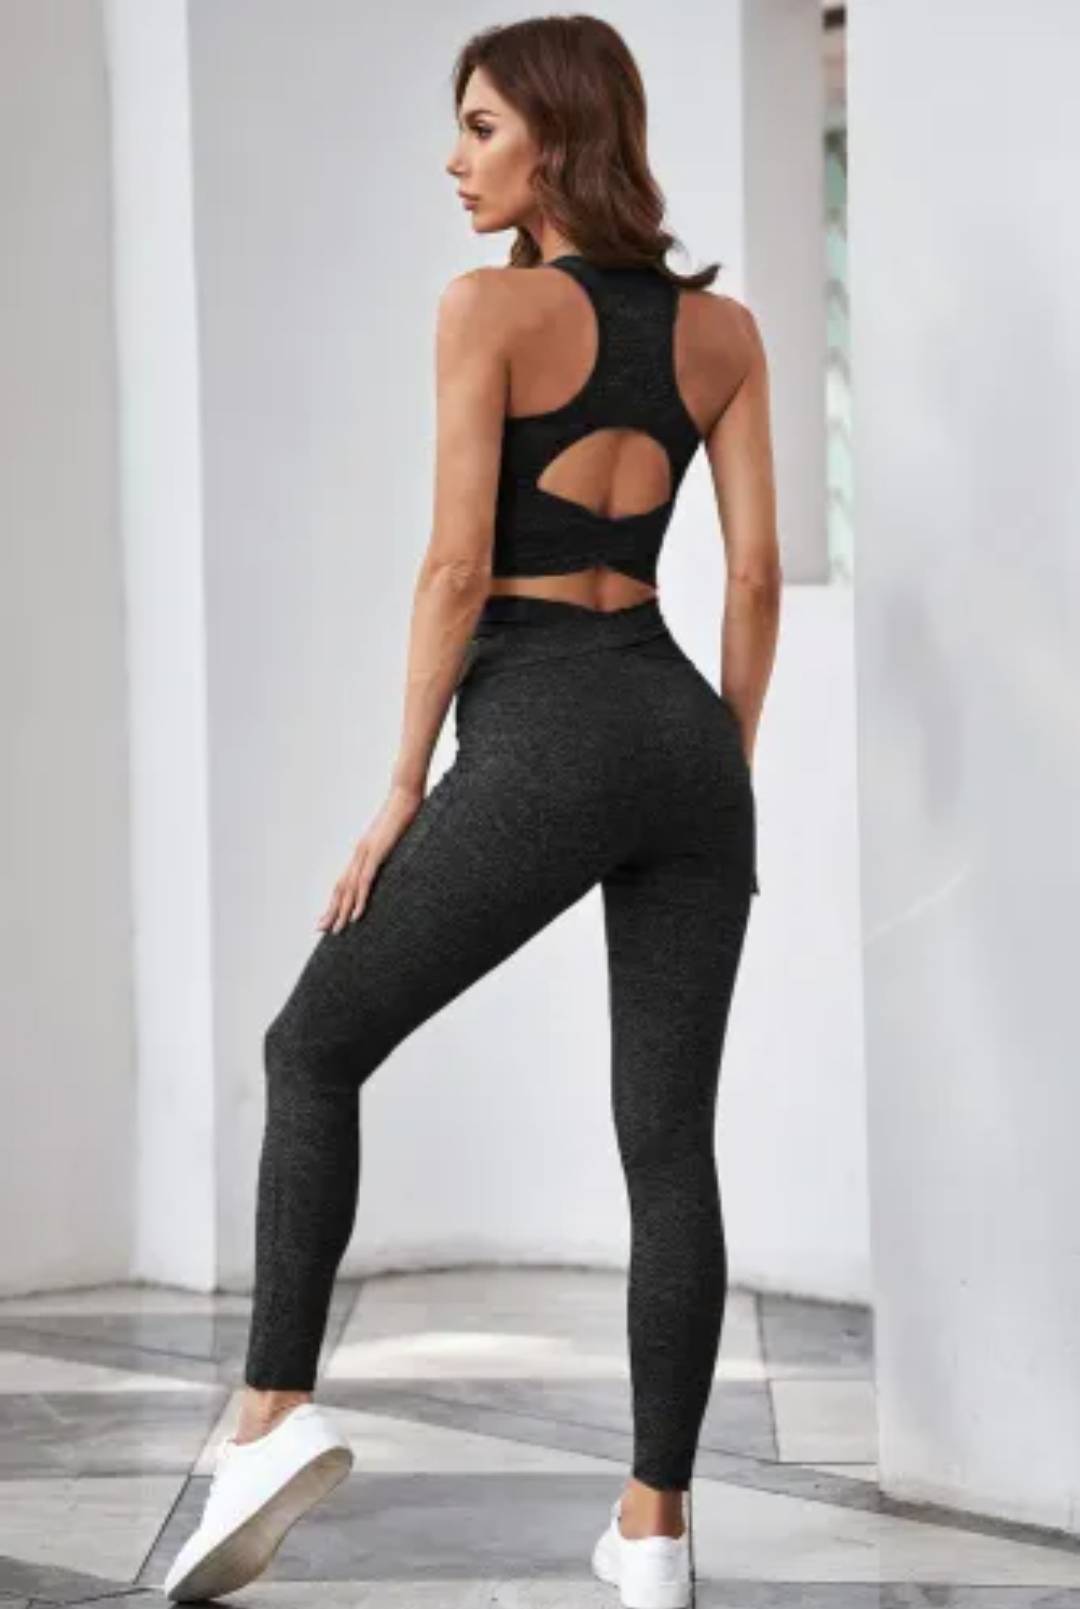 Crossover Active Wear Set